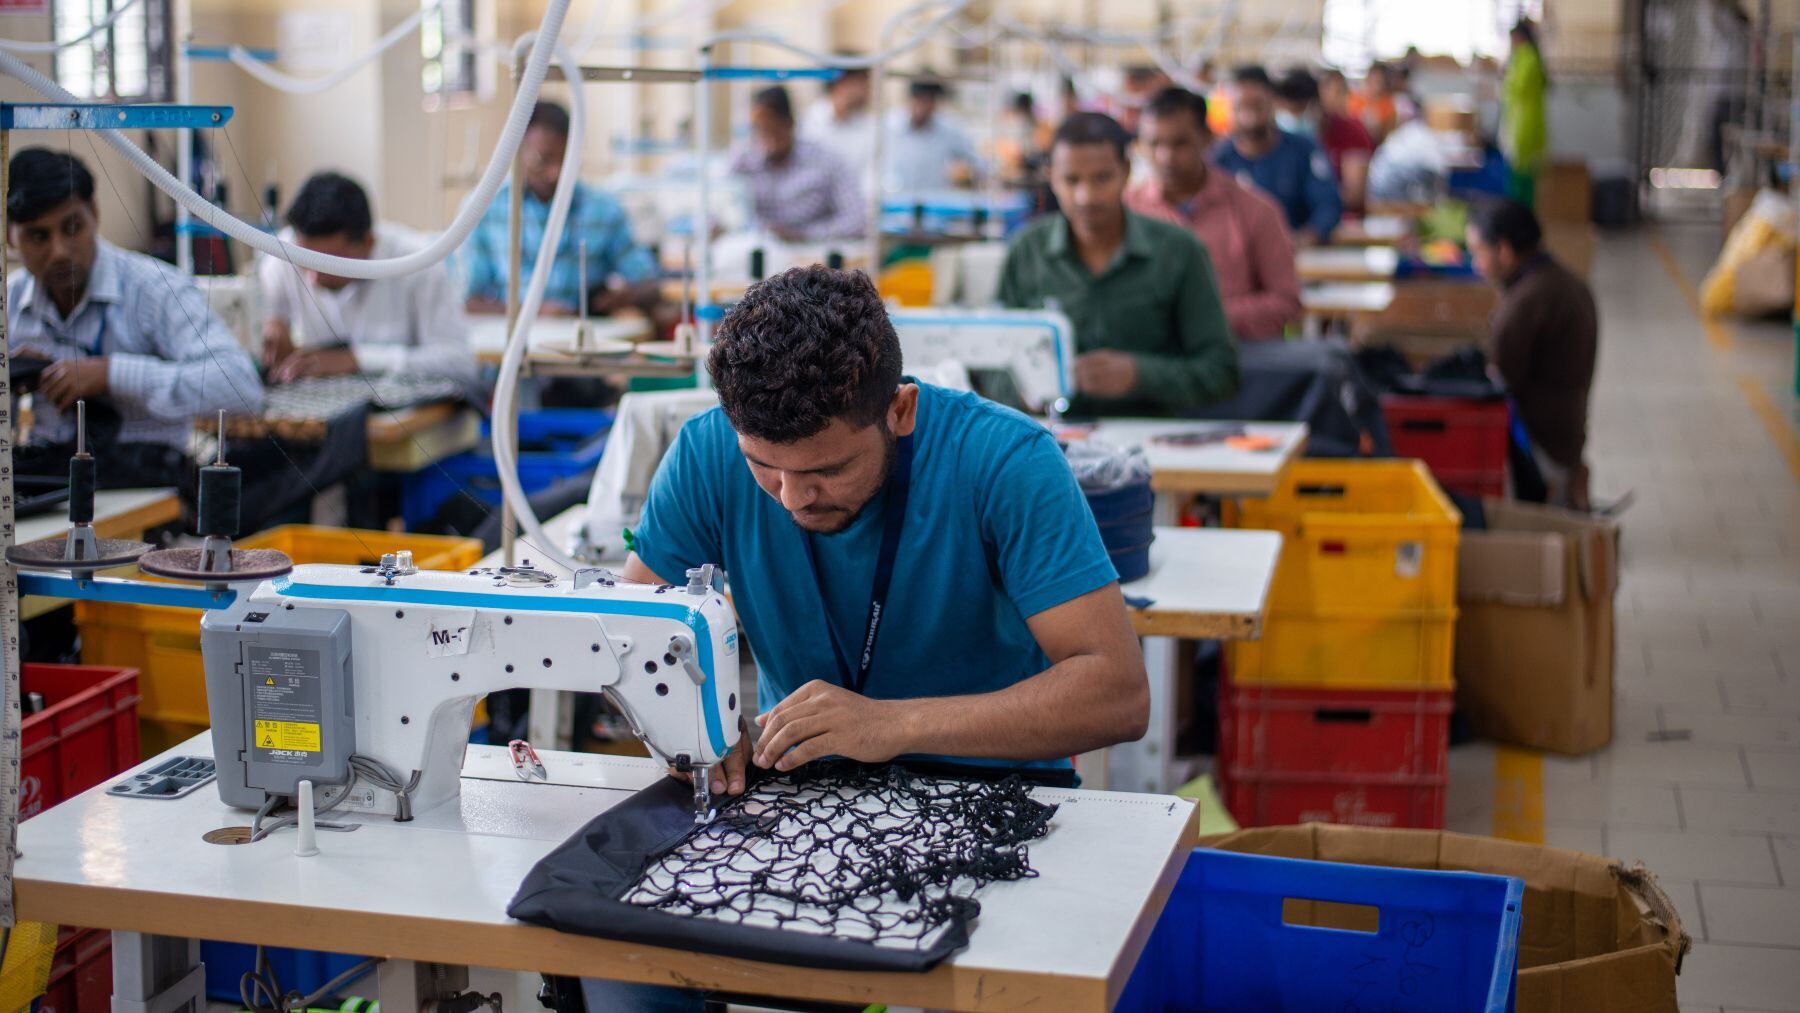 India’s Textile Industry Faces Tough Times as Consumers Cut Spending